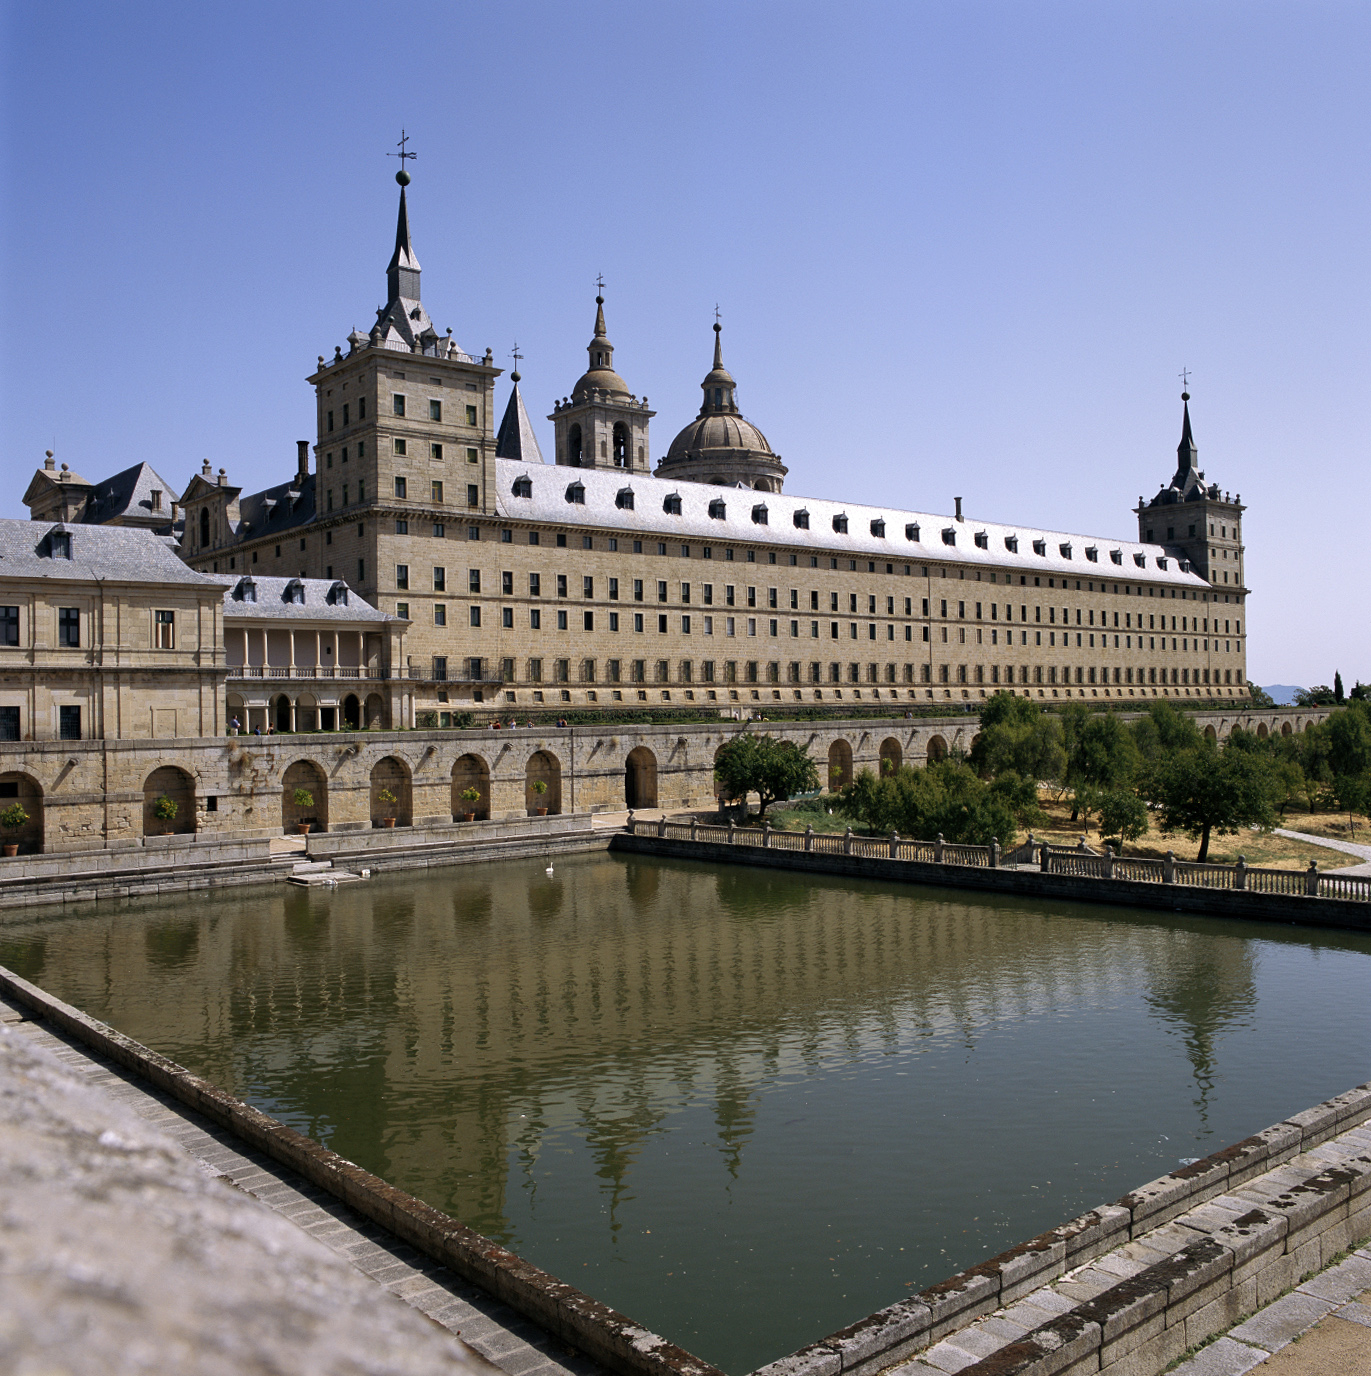 Monastery and Site of the Escurial, Madrid (Spain)